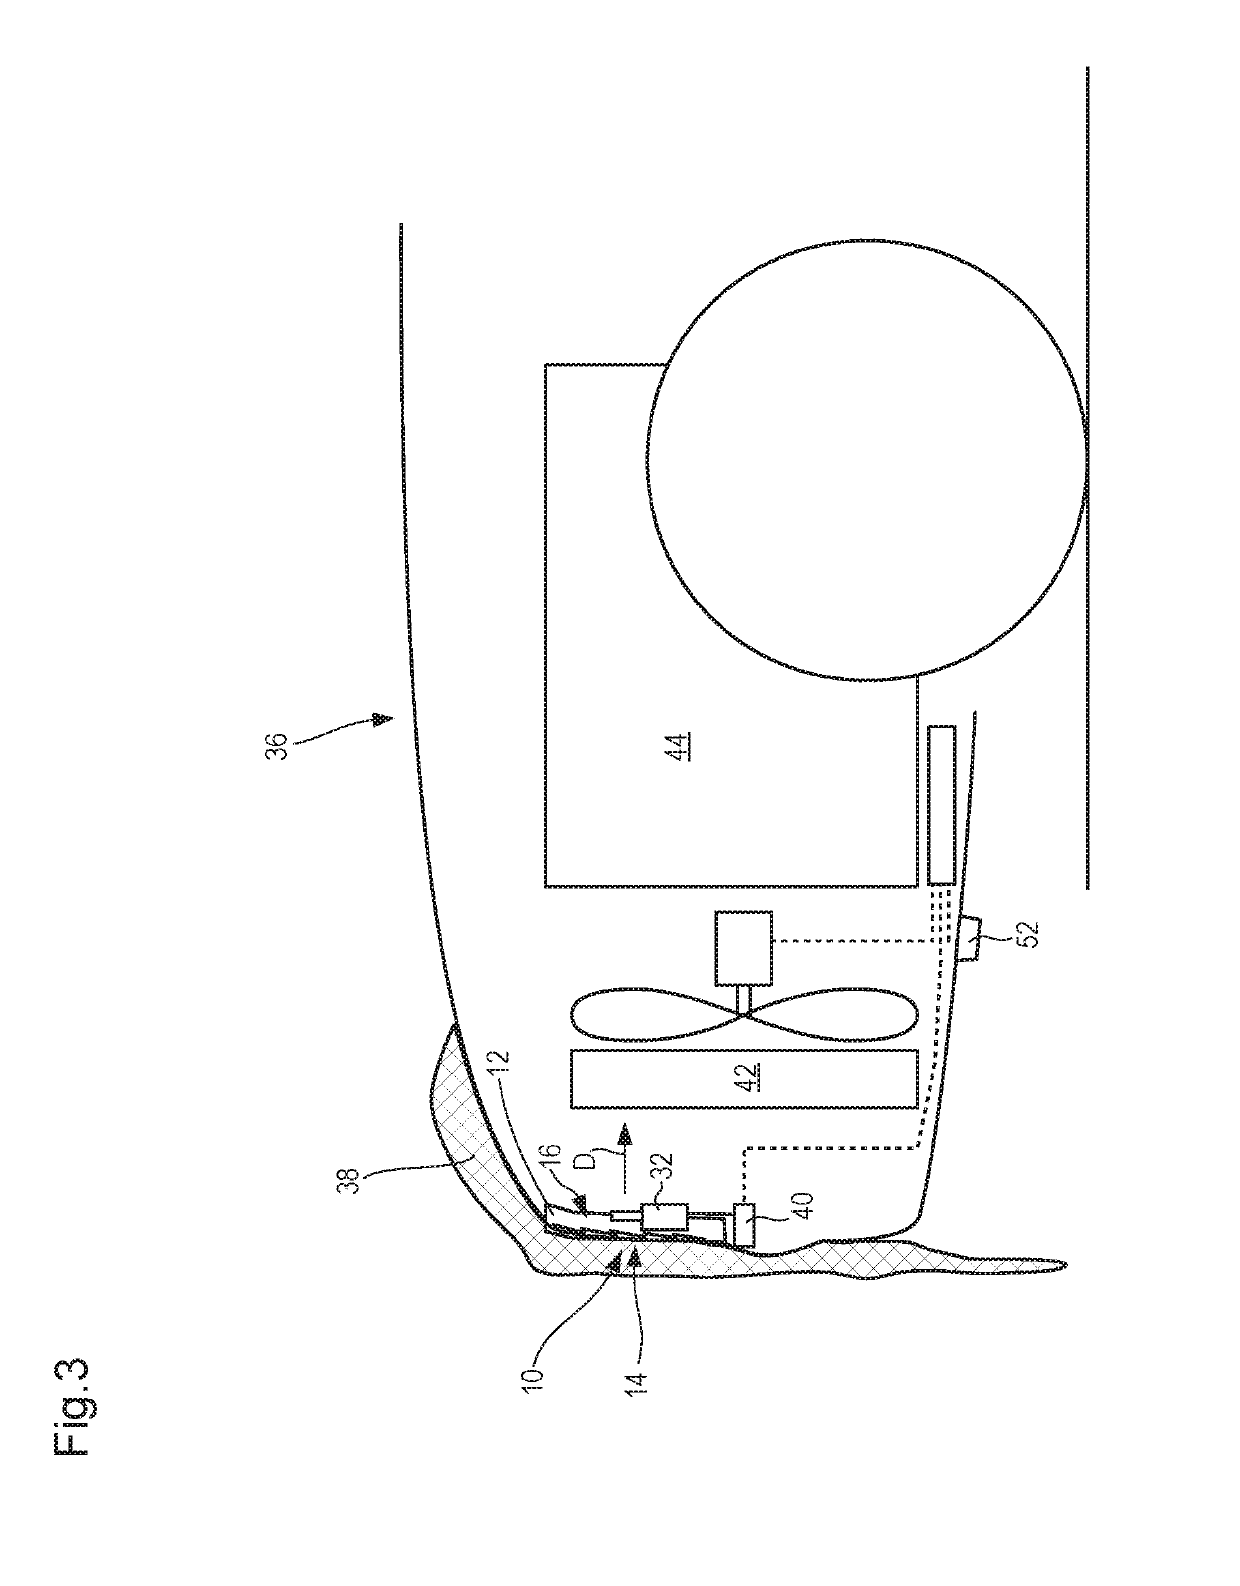 Air flap apparatus having an air flap constituted at least in portions from electrically conductive plastic for electrical heating thereof